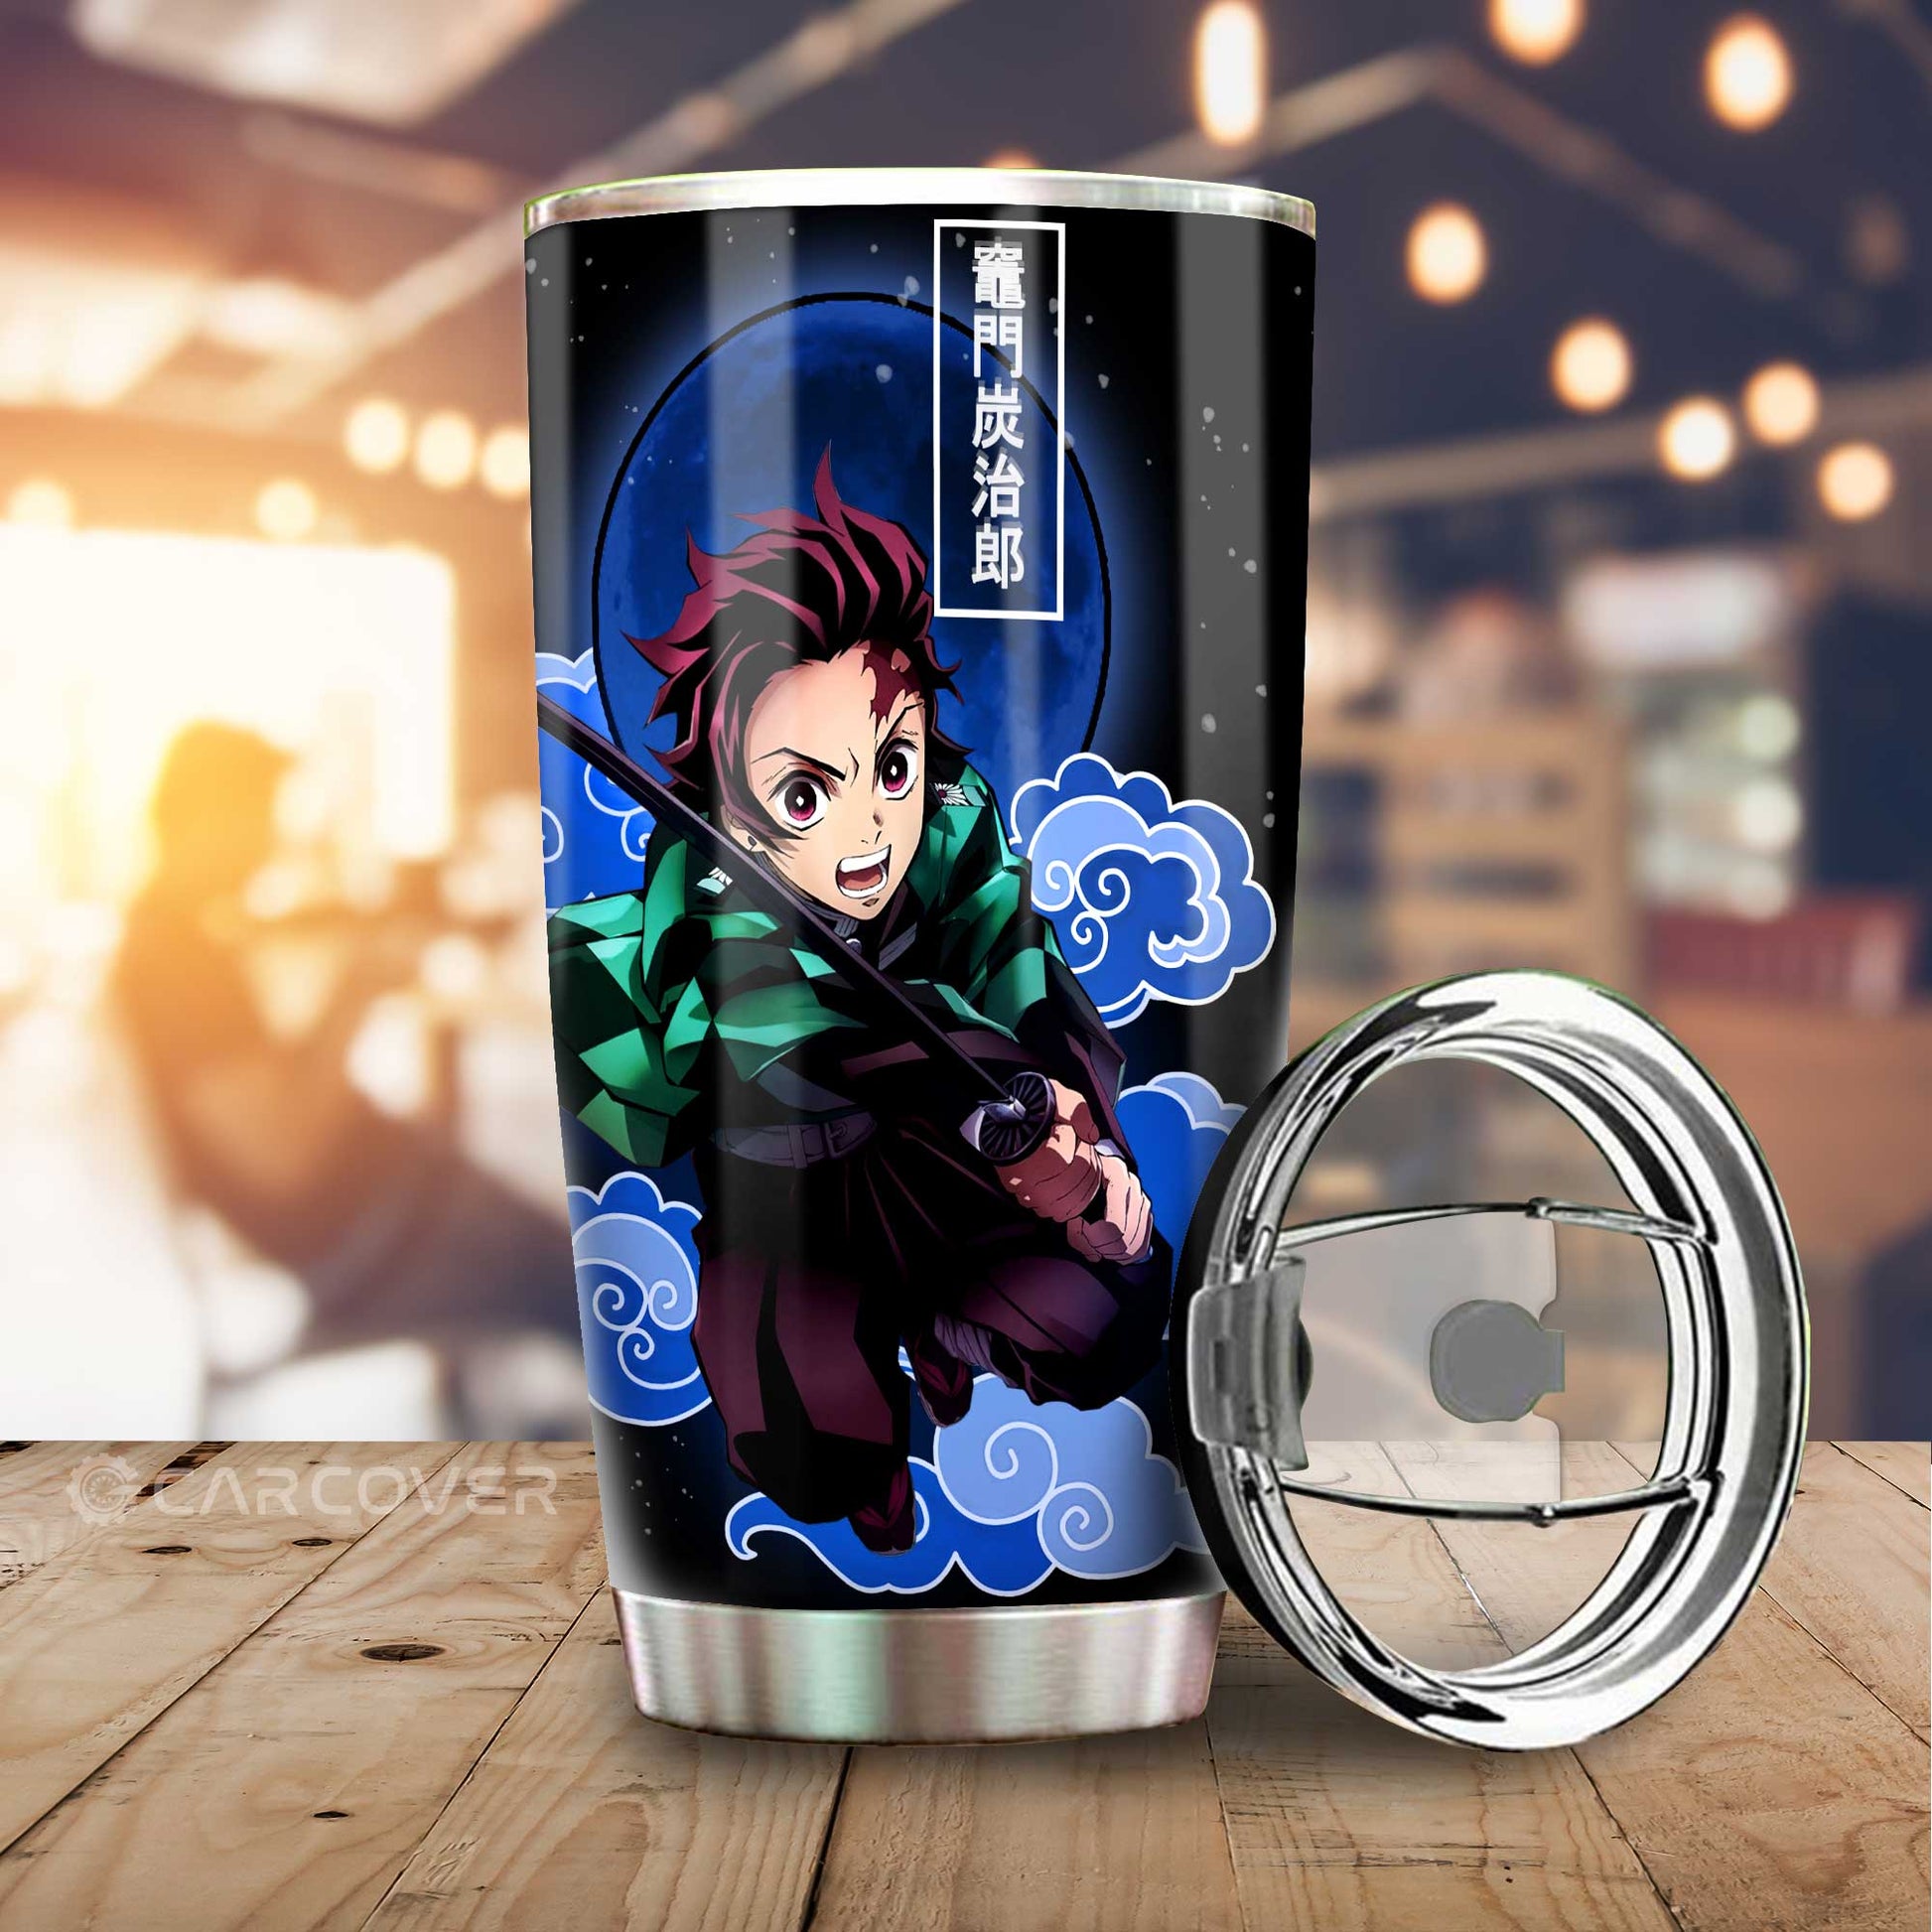 Tanjiro And Nezuko Tumbler Cup Custom Anime Demon Slayer Car Accessories Perfect Gift For Fan - Gearcarcover - 2